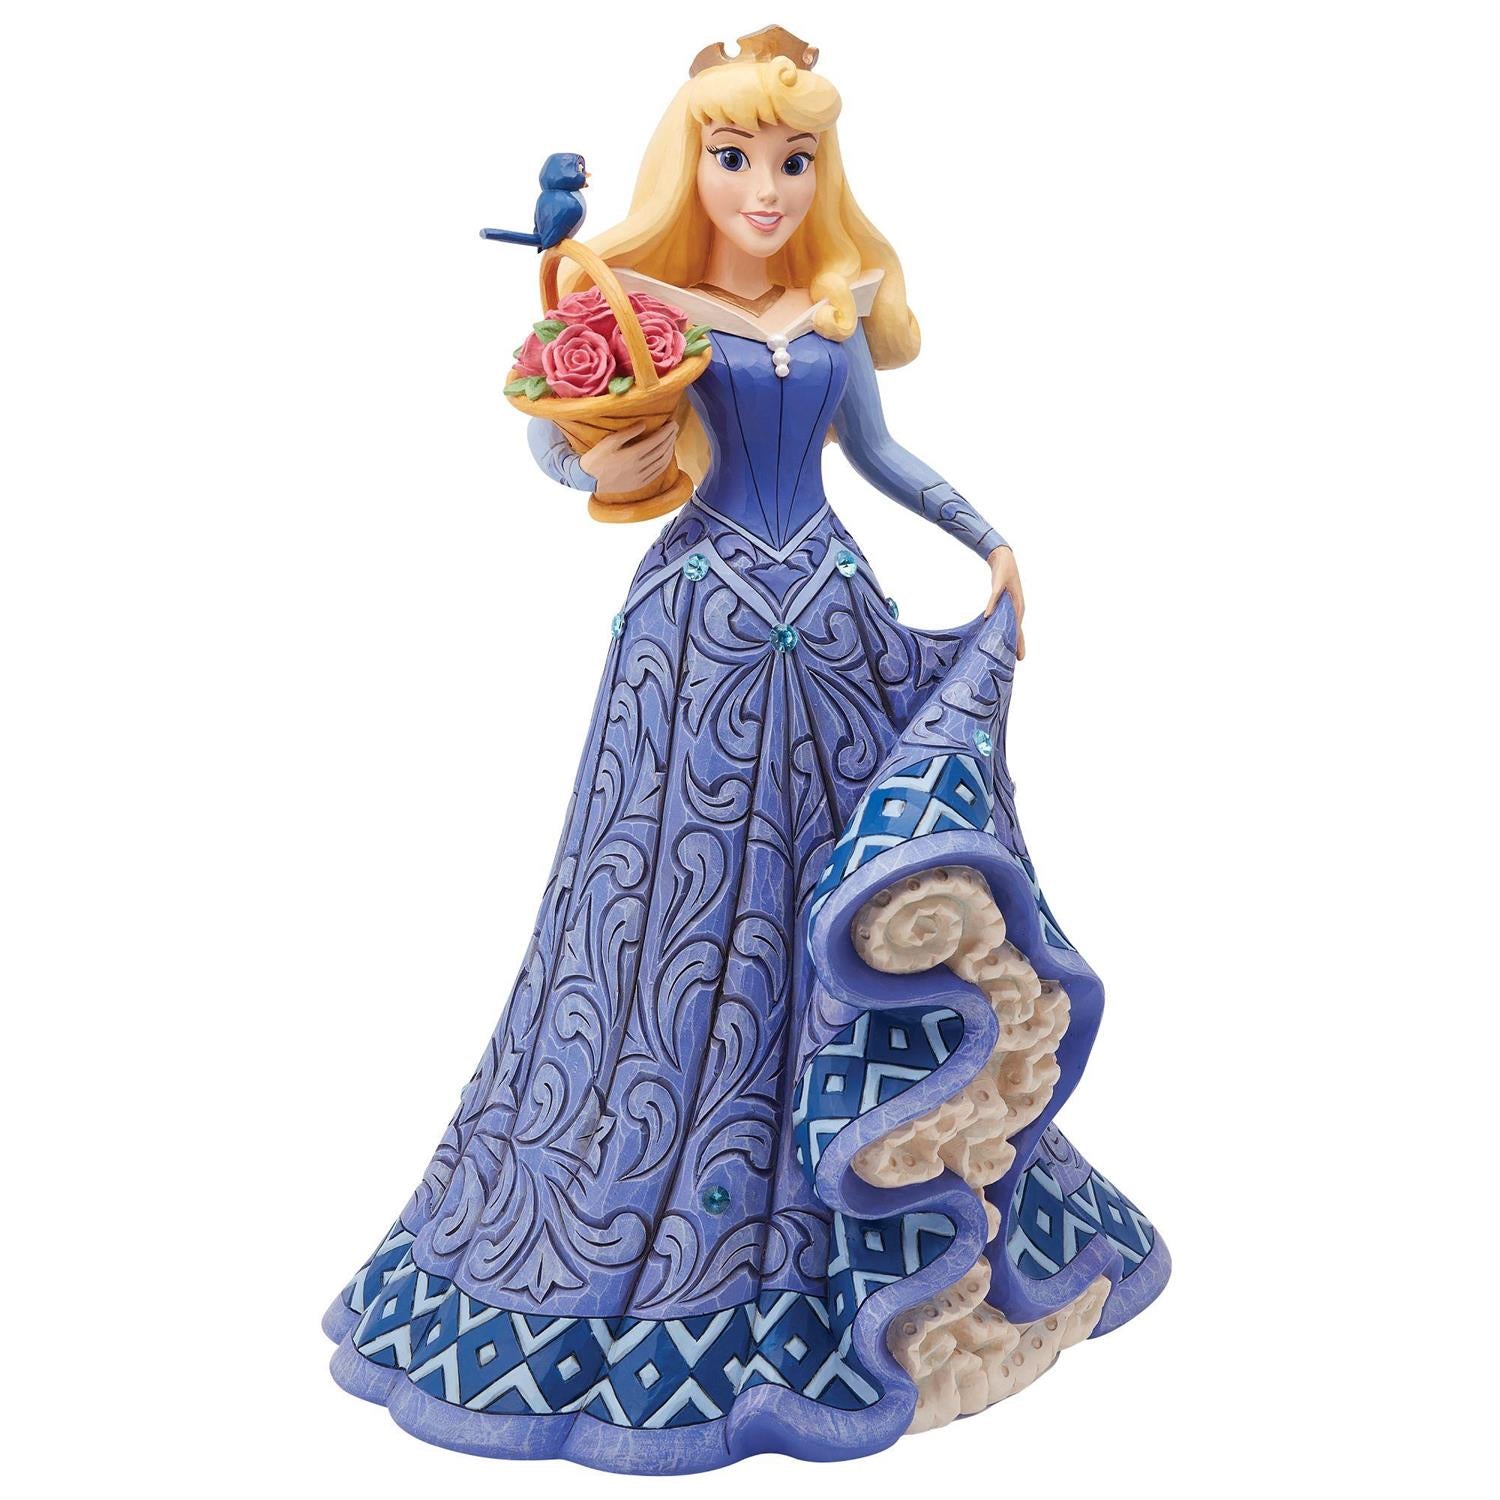 Princess Aurora in a blue gown holding a basket full of roses